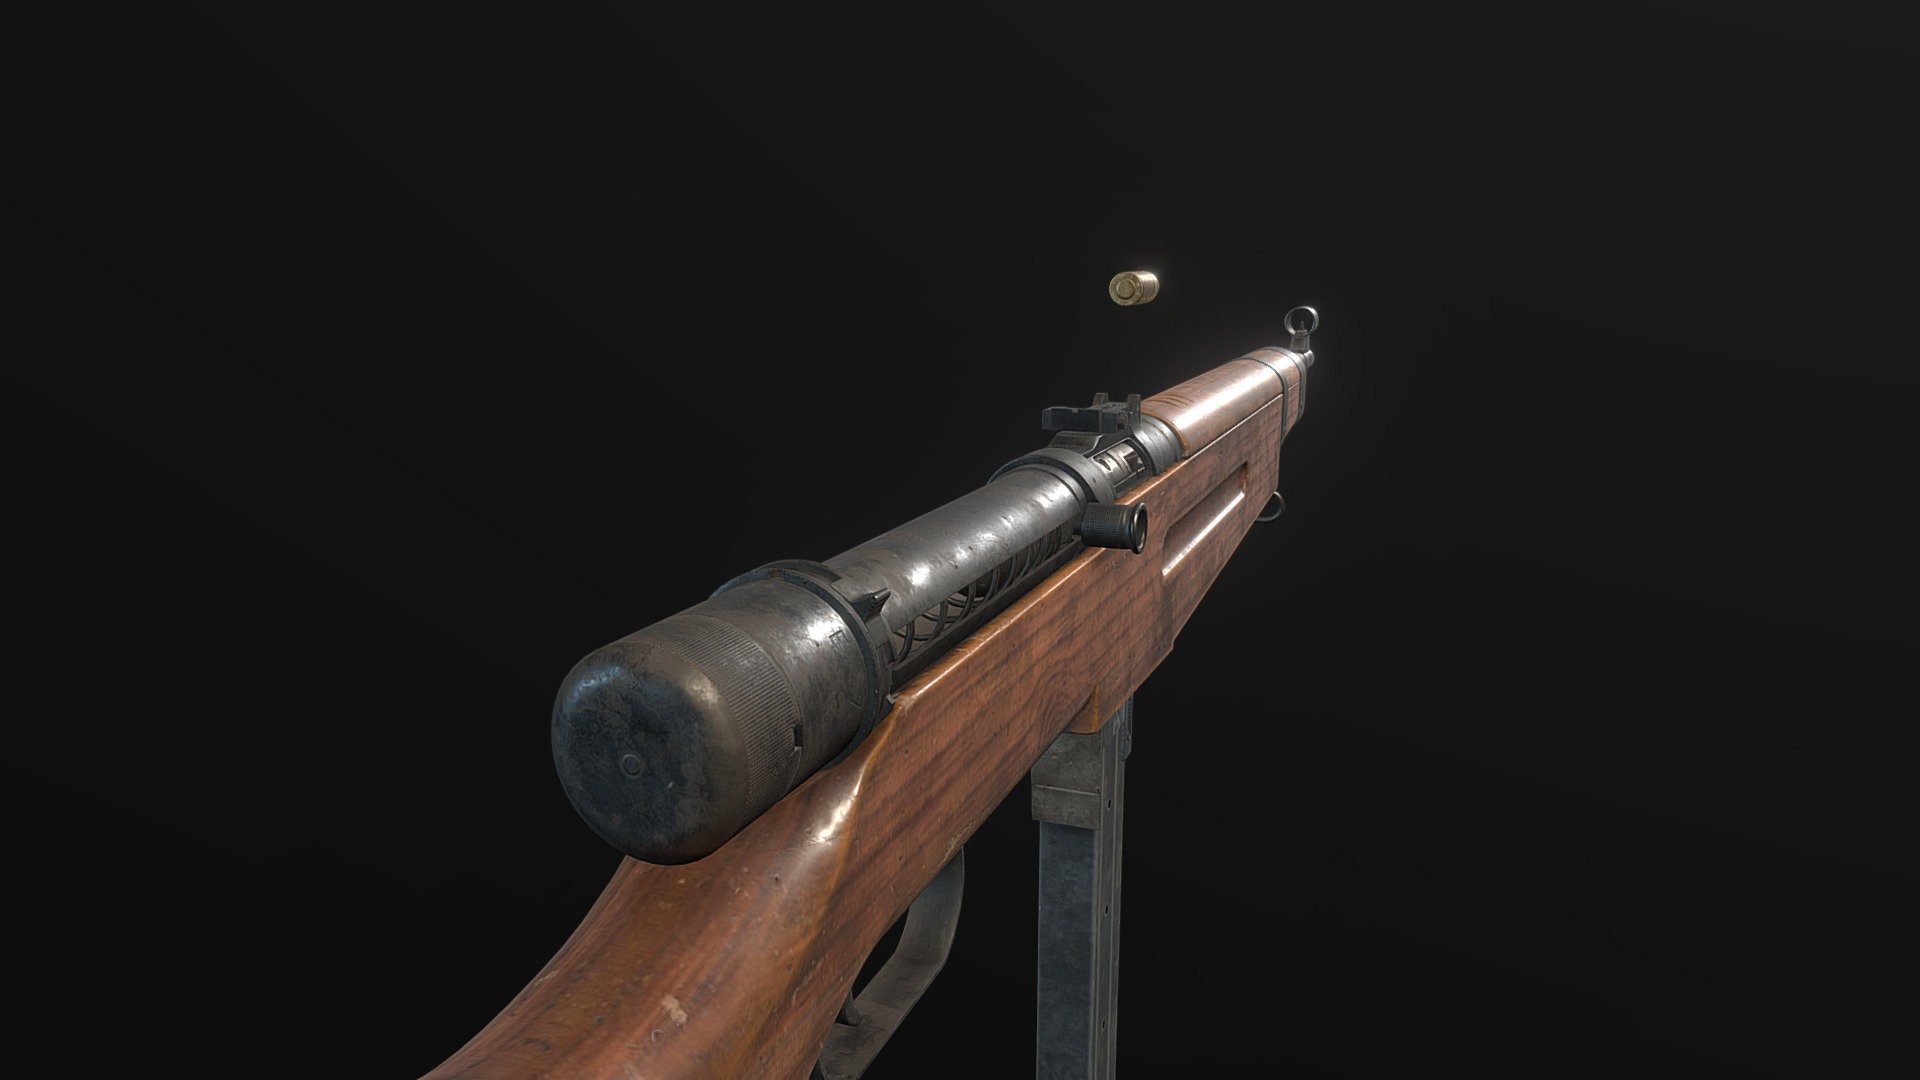 39M Danuvia low poly Hungarian submachine gun.
10k poly and one 4K PBR and one 2K PBR maps

The 9×25mm Danuvia submachine gun was designed by Hungarian engineer Pál Király in the late 1930s, and was produced by the titular Danuvia company. The guns were issued to Hungarian army troops in 1939 and remained in service throughout World War II and until the early 1950s. A total of roughly 8,000 were made between 1939 and 1945. The Danuvia was a large, sturdy weapon, similar to a carbine. Inspired by the SIG MKMS,[4] the Danuvia used the more powerful 9×25mm Mauser round, and incorporated lever-delayed blowback in order to better manage this high energy cartridge. The Danuvia's magazine can be folded forward into a recess in the stock where a plate then slides over it.[3] - 39M Danuvia - Buy Royalty Free 3D model by mastert 3d model